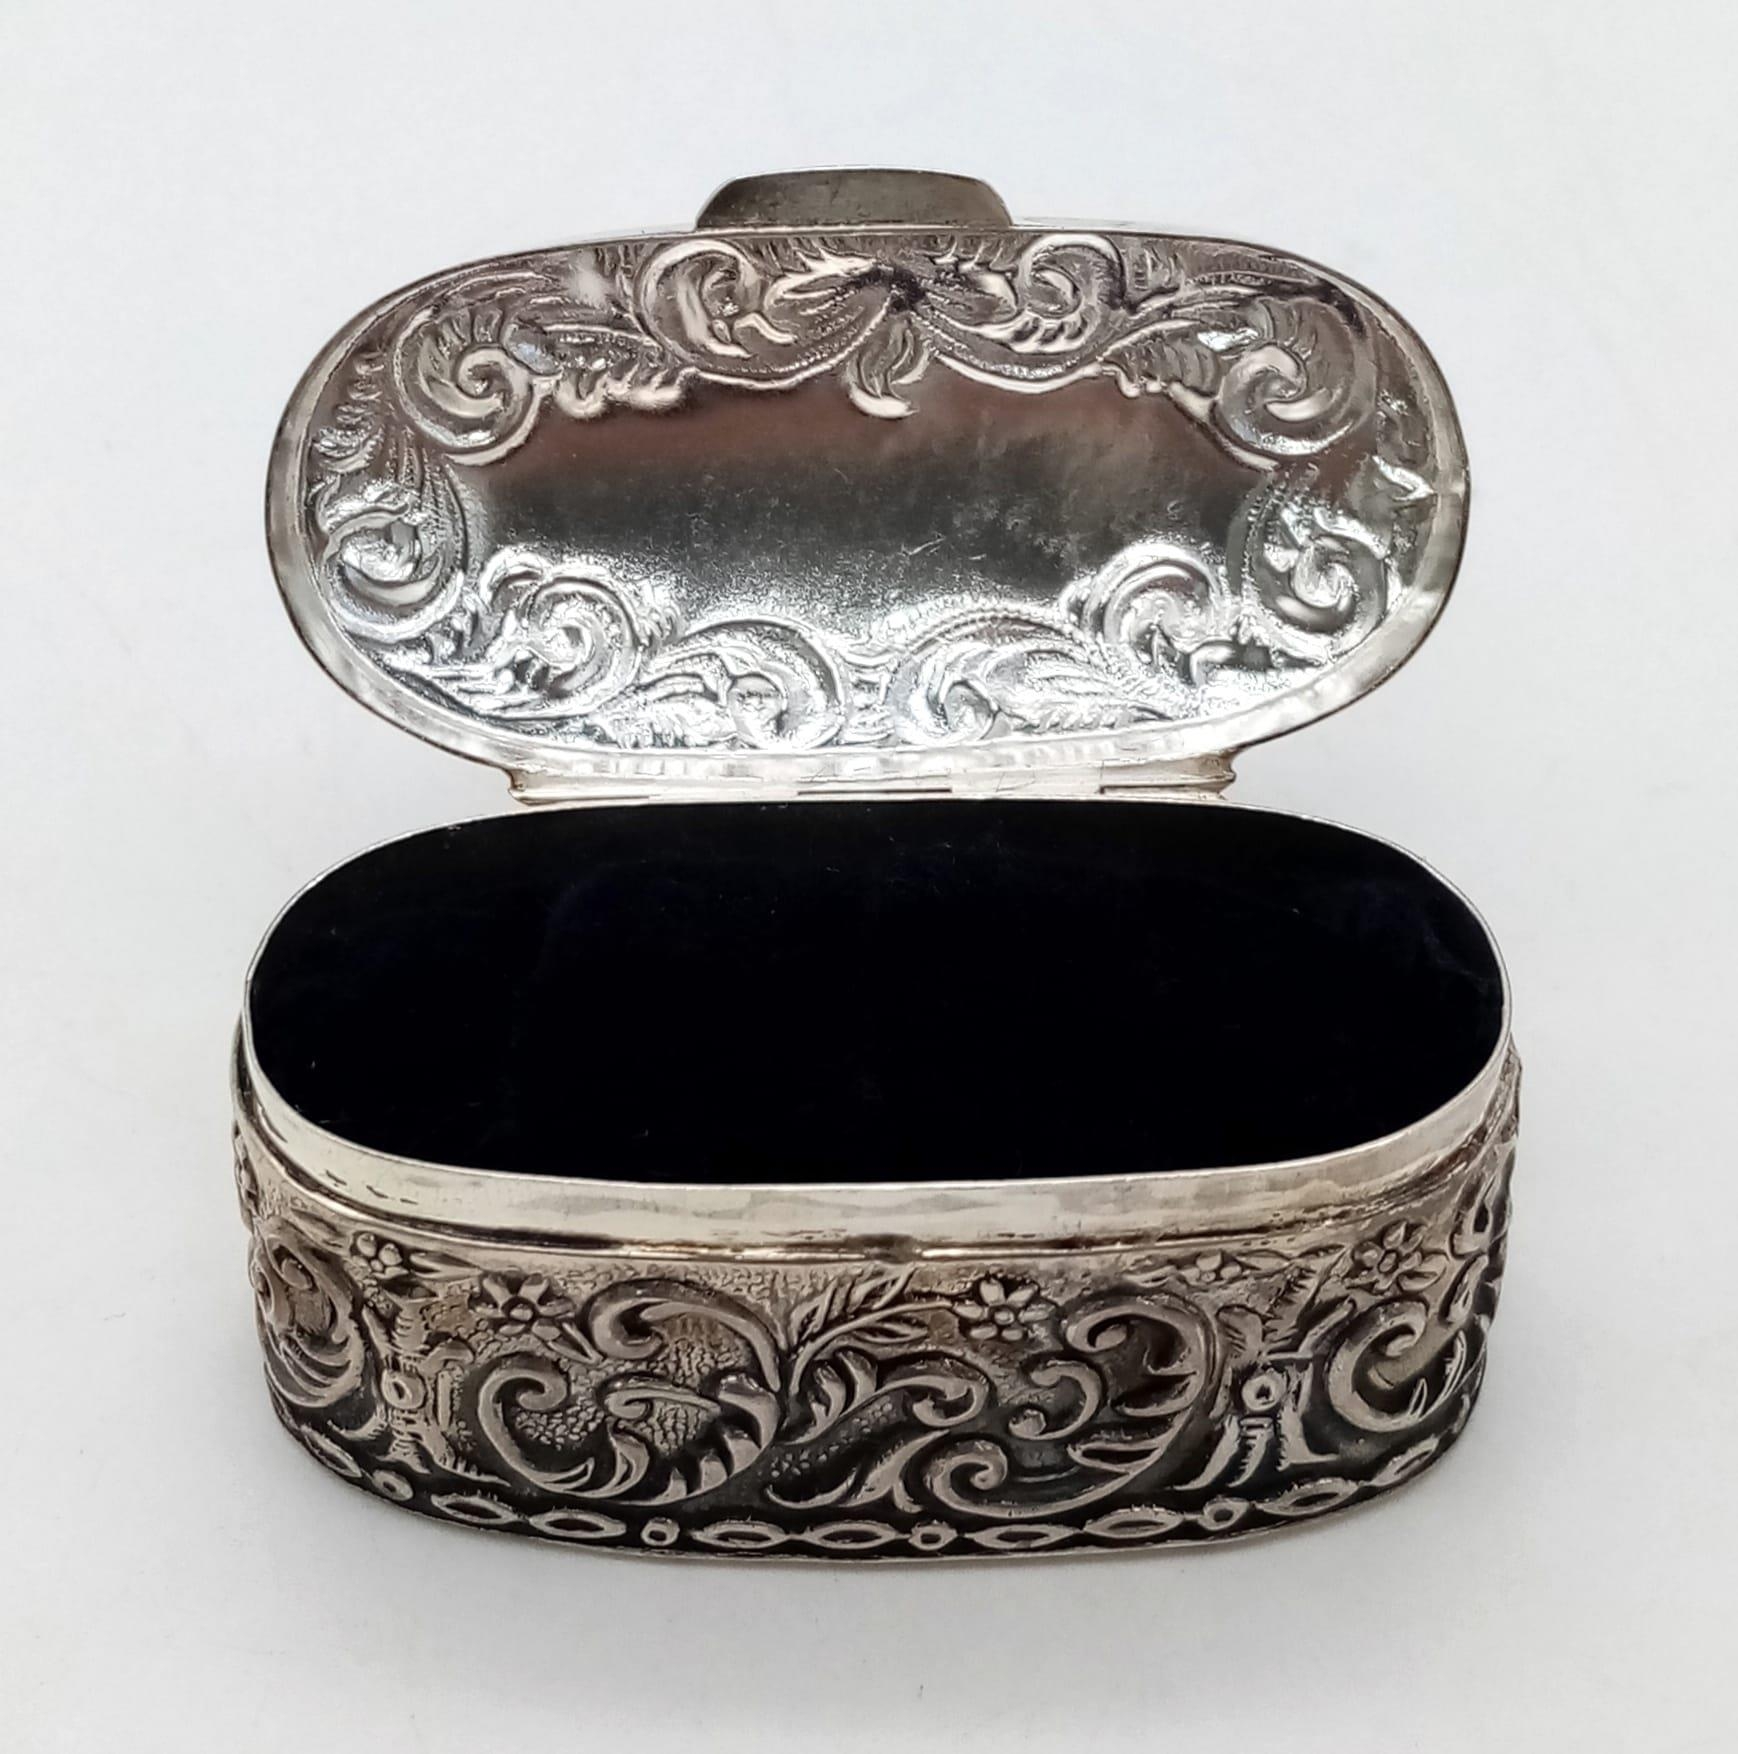 An Antique Silver Oval Trinket Box with Scrolled Decoration. 28g. 5 x 2.5cm.